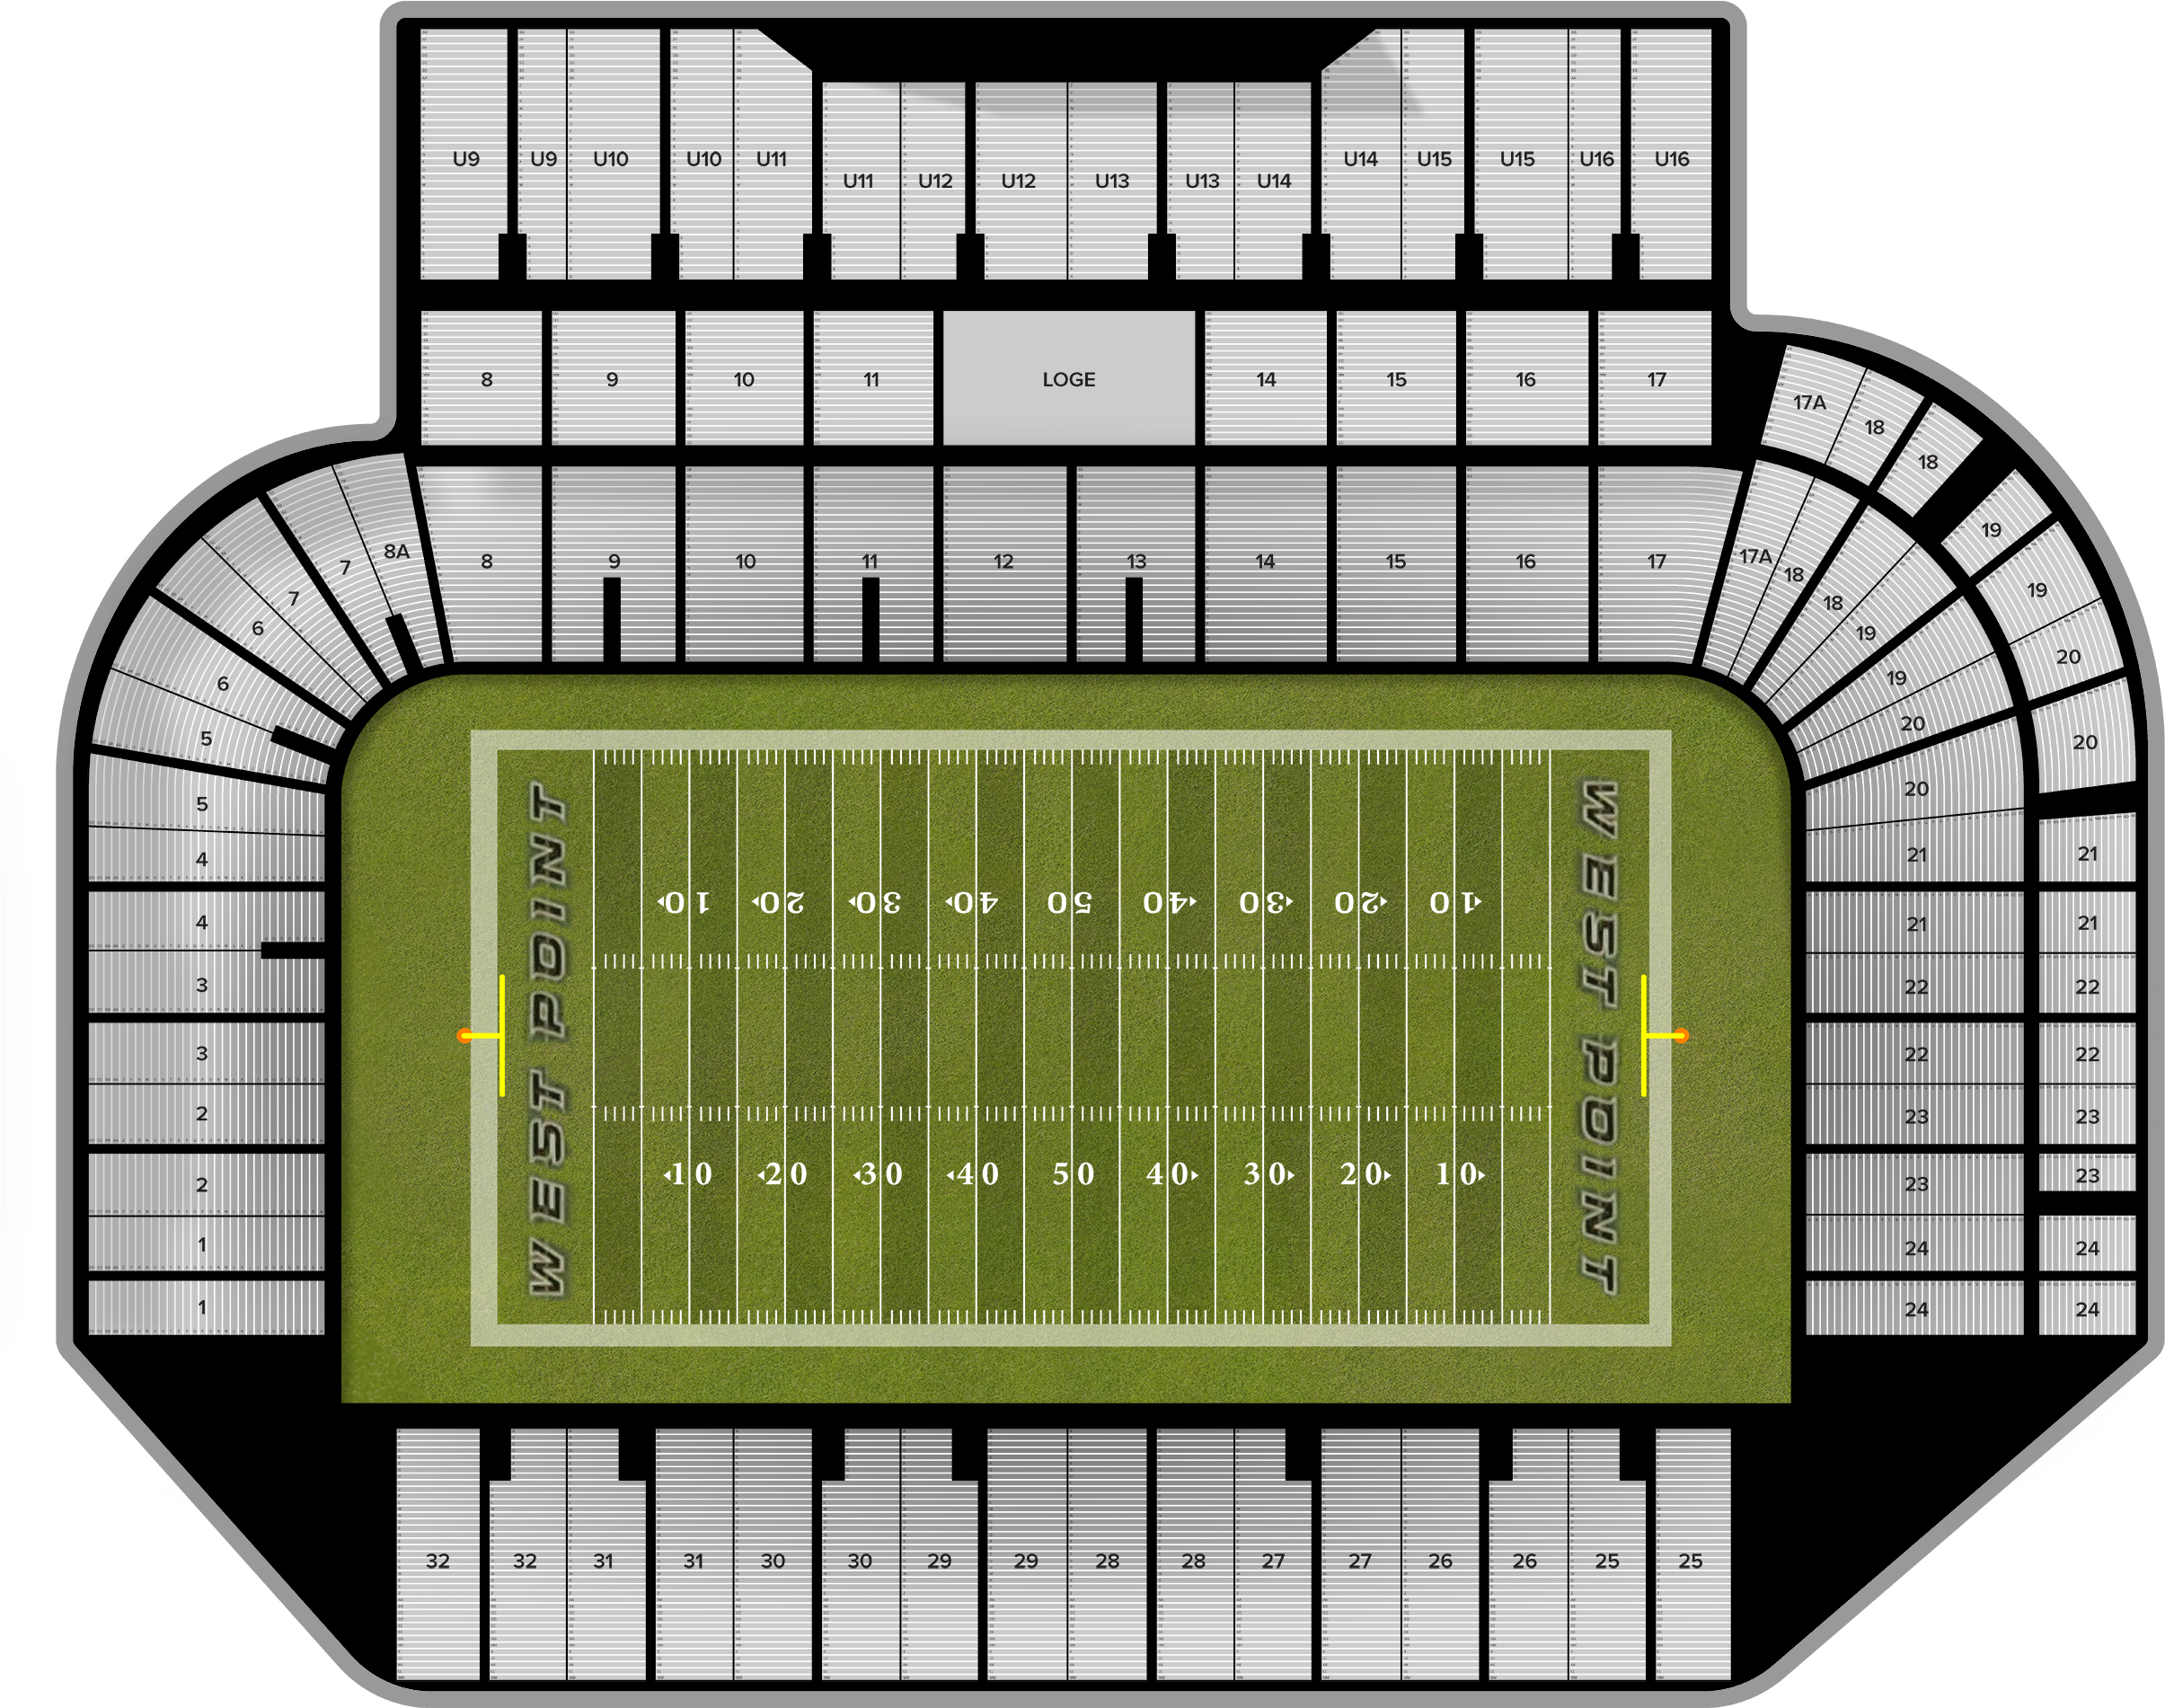 Download Army Michie Stadium Seating Chart Elcho Table Army Michie